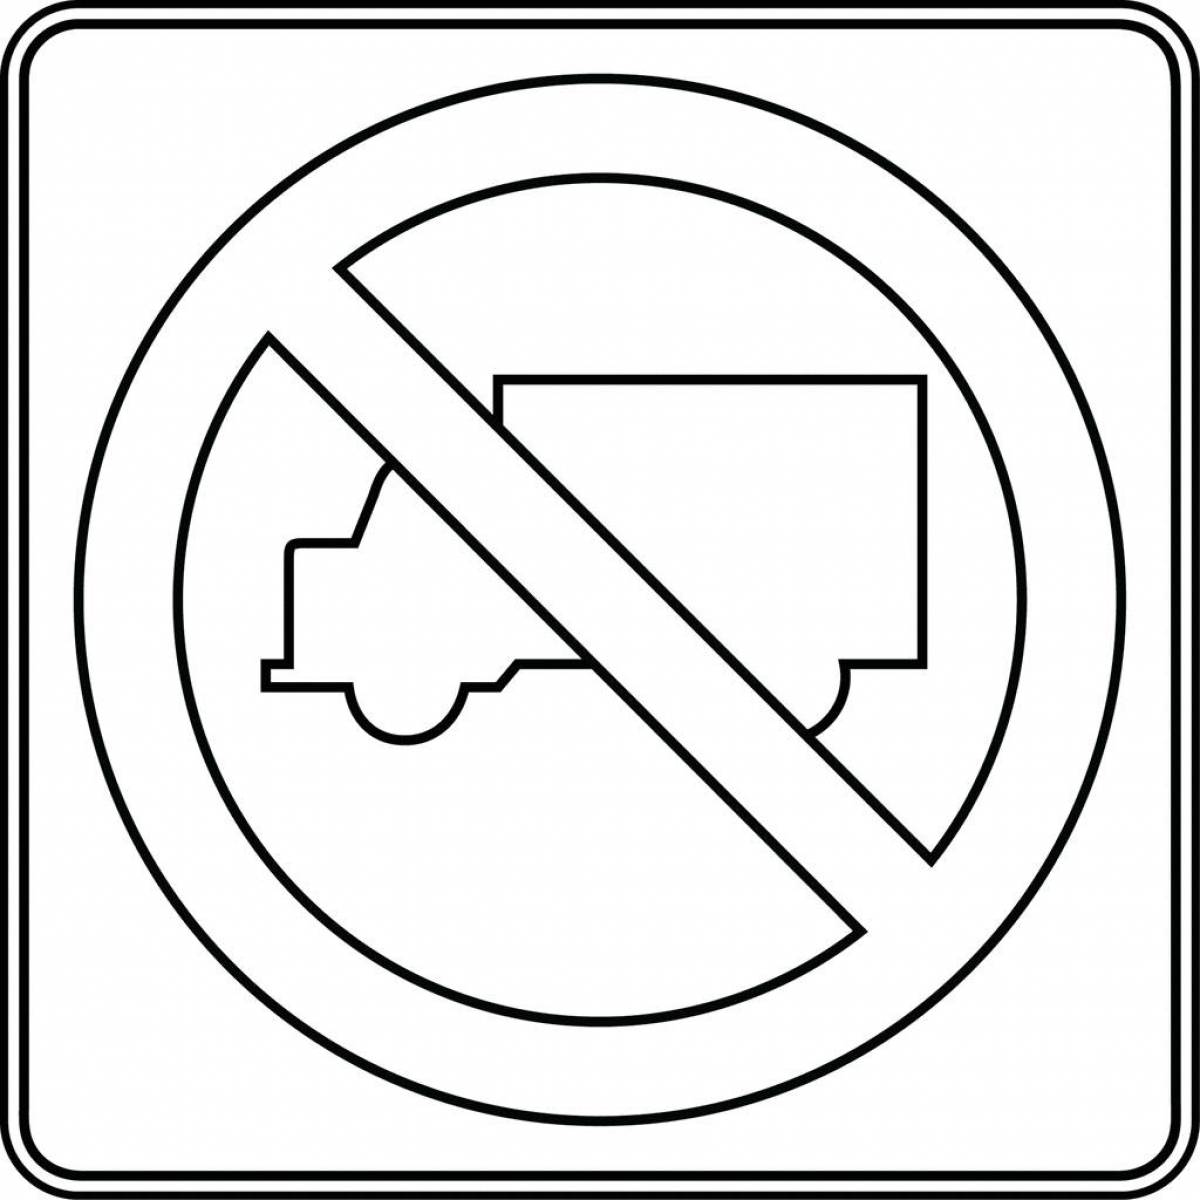 Creative traffic signs coloring page for kids